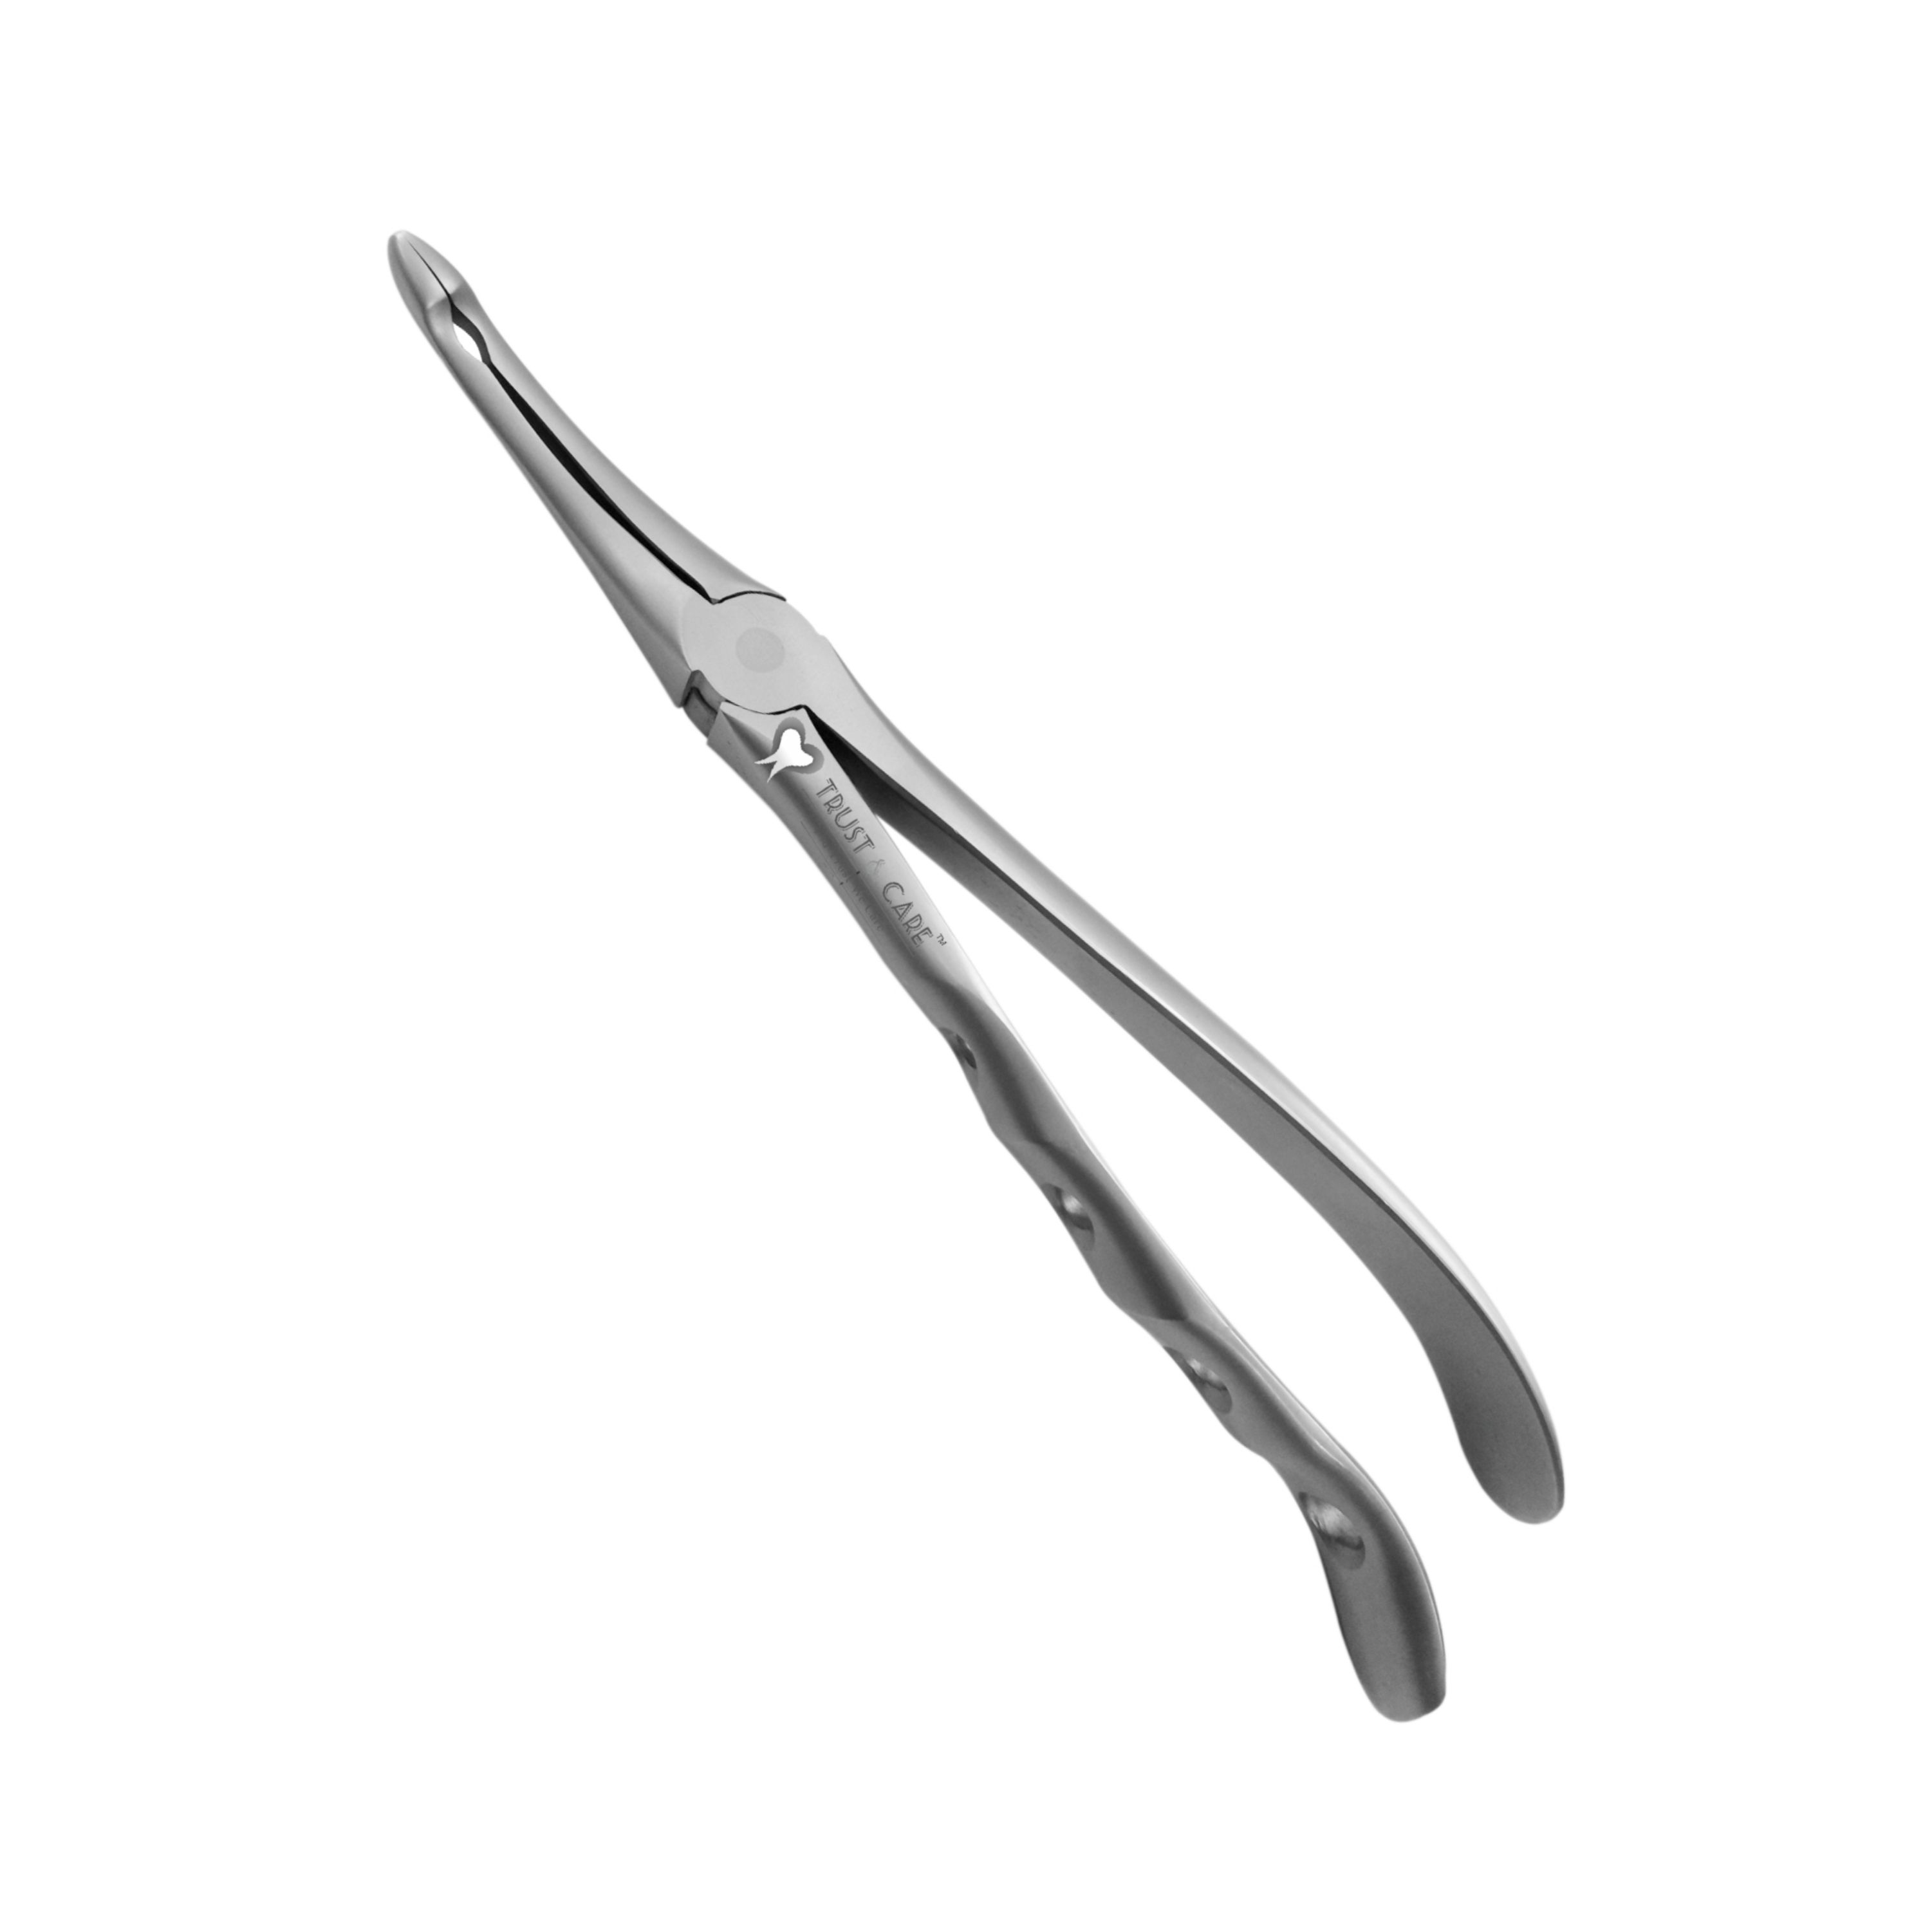 Trust & Care Secure Forcep Upper Roots Fig No. 944.01